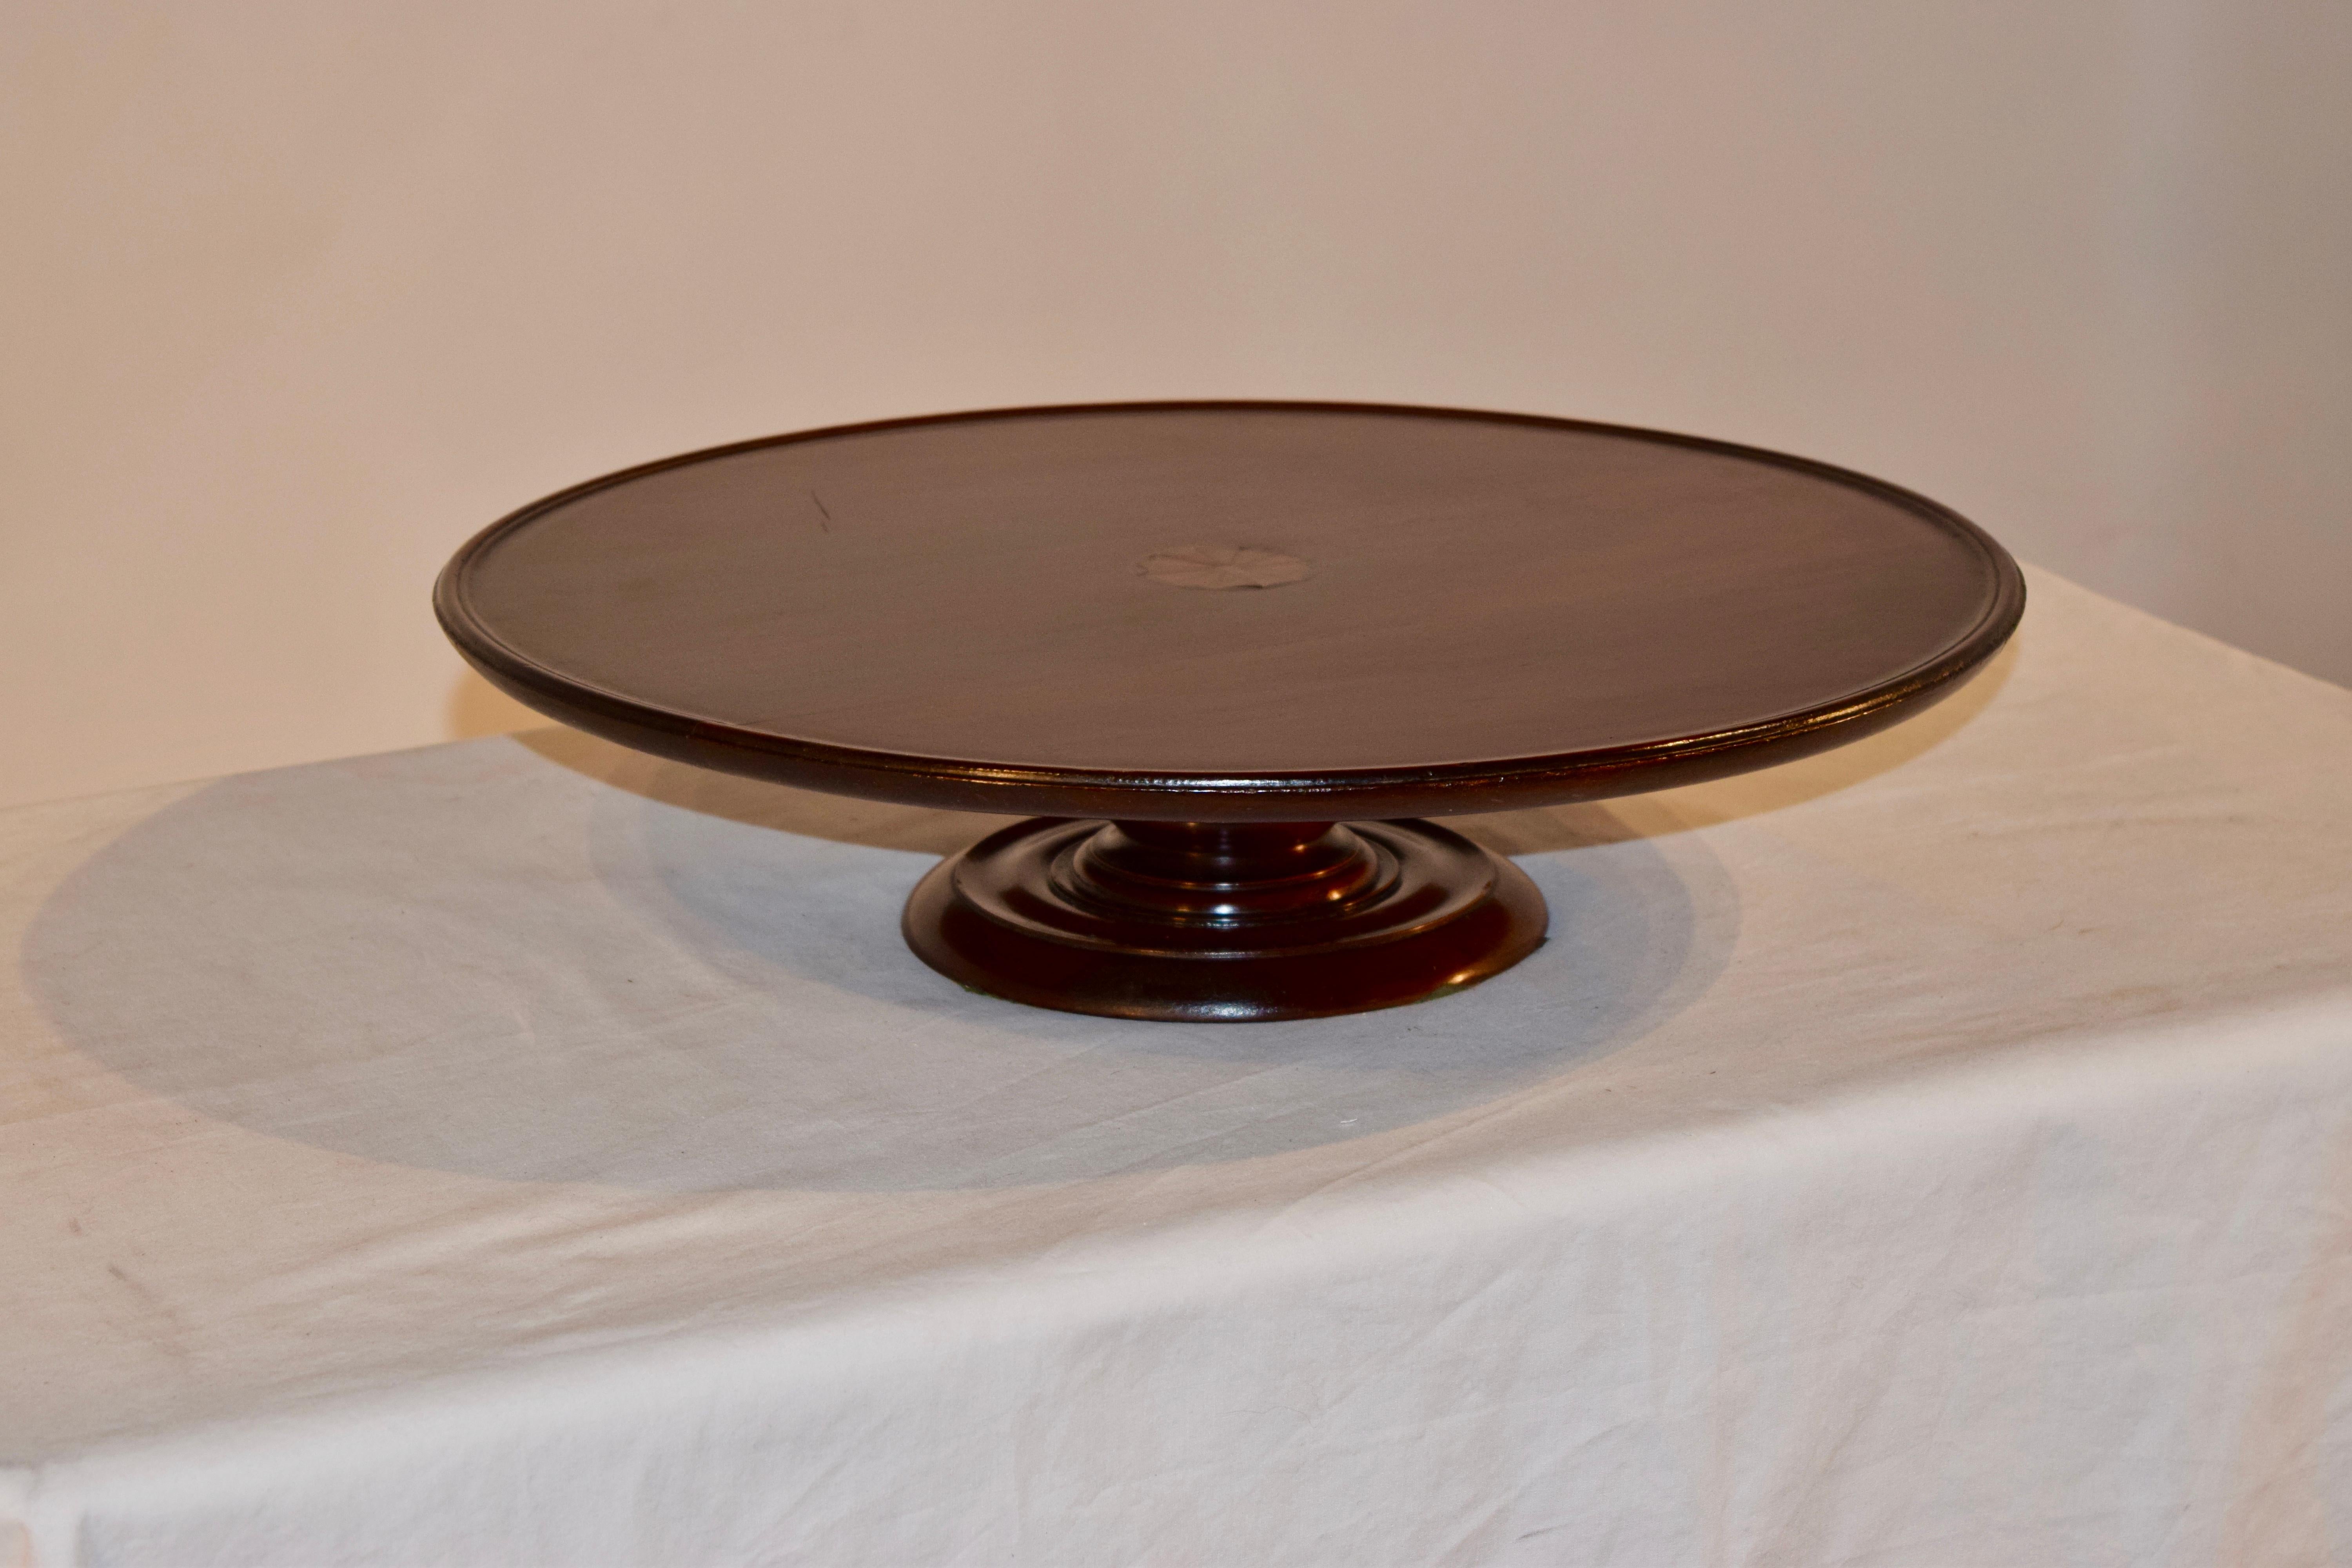 Mahogany lazy susan from England with a pie crust edge and a central inlay medallion of a fan. The base is nicely hand-turned.